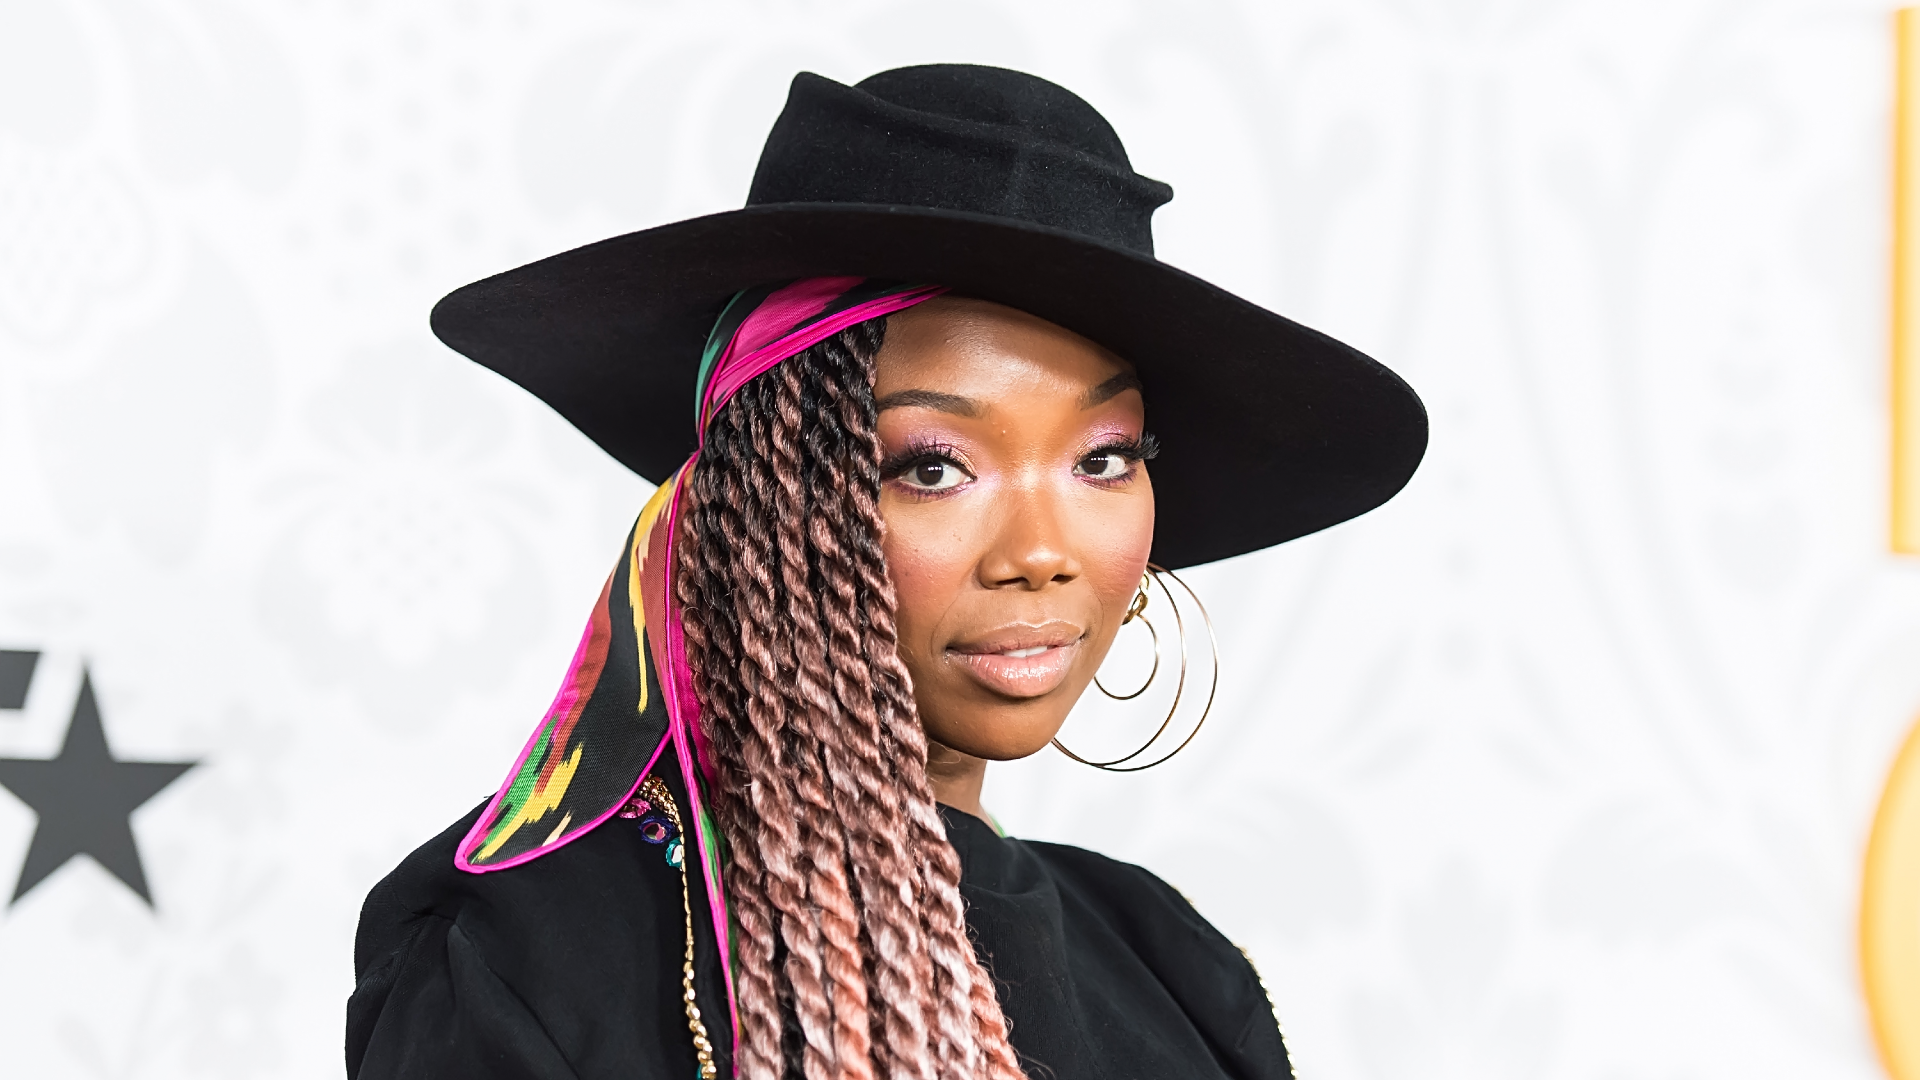 Brandy Stuns In Must-See Braids On The Cover Of New Album 'B7'